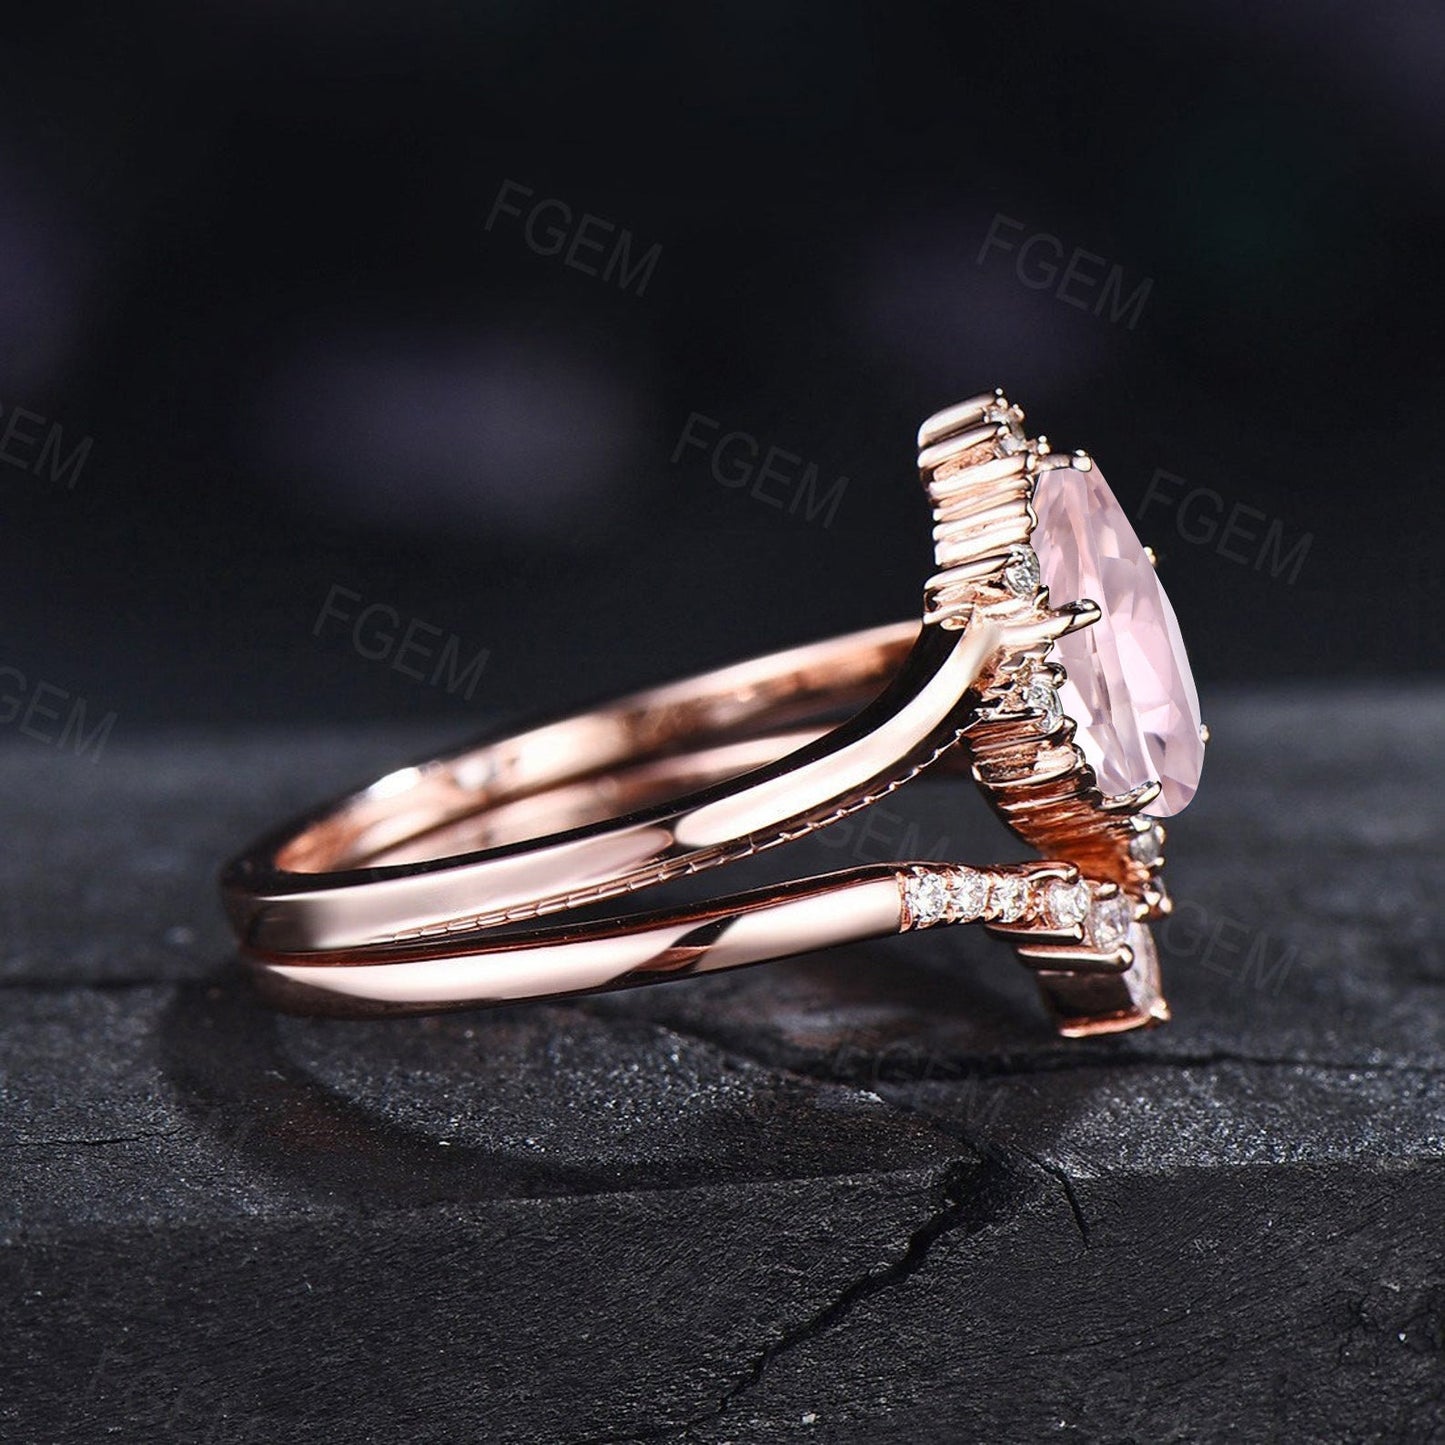 Pear Morganite Engagement Ring Set Sterling Silver Vintage Pink Morganite Ring Set Curve Wedding Band Personalize Anniversary Gift for Women